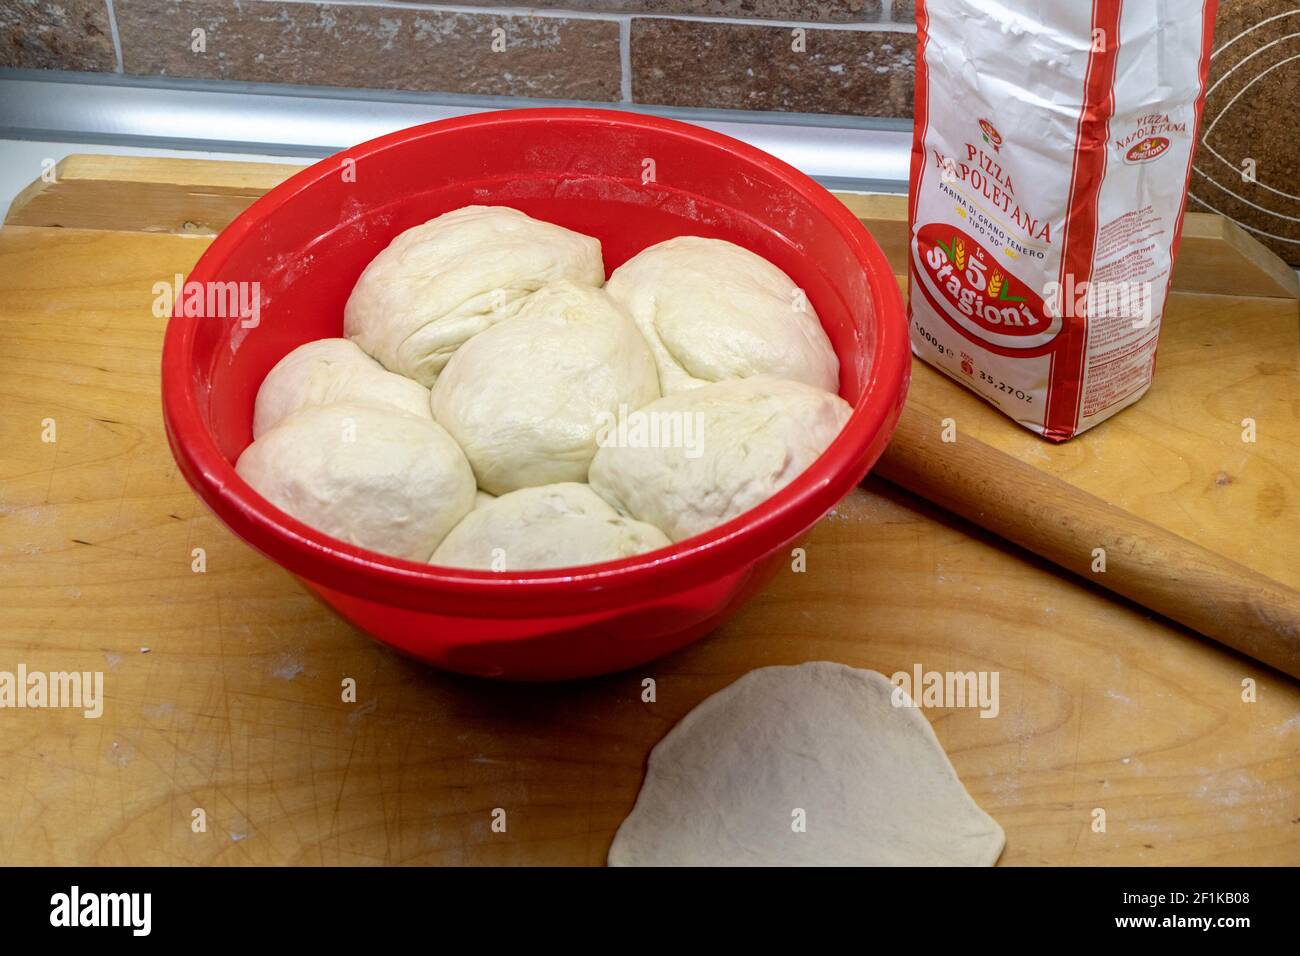 Illustrative editorial, home made pizza dough in a red plastic bowl and a paper bag with special italian flour Stock Photo